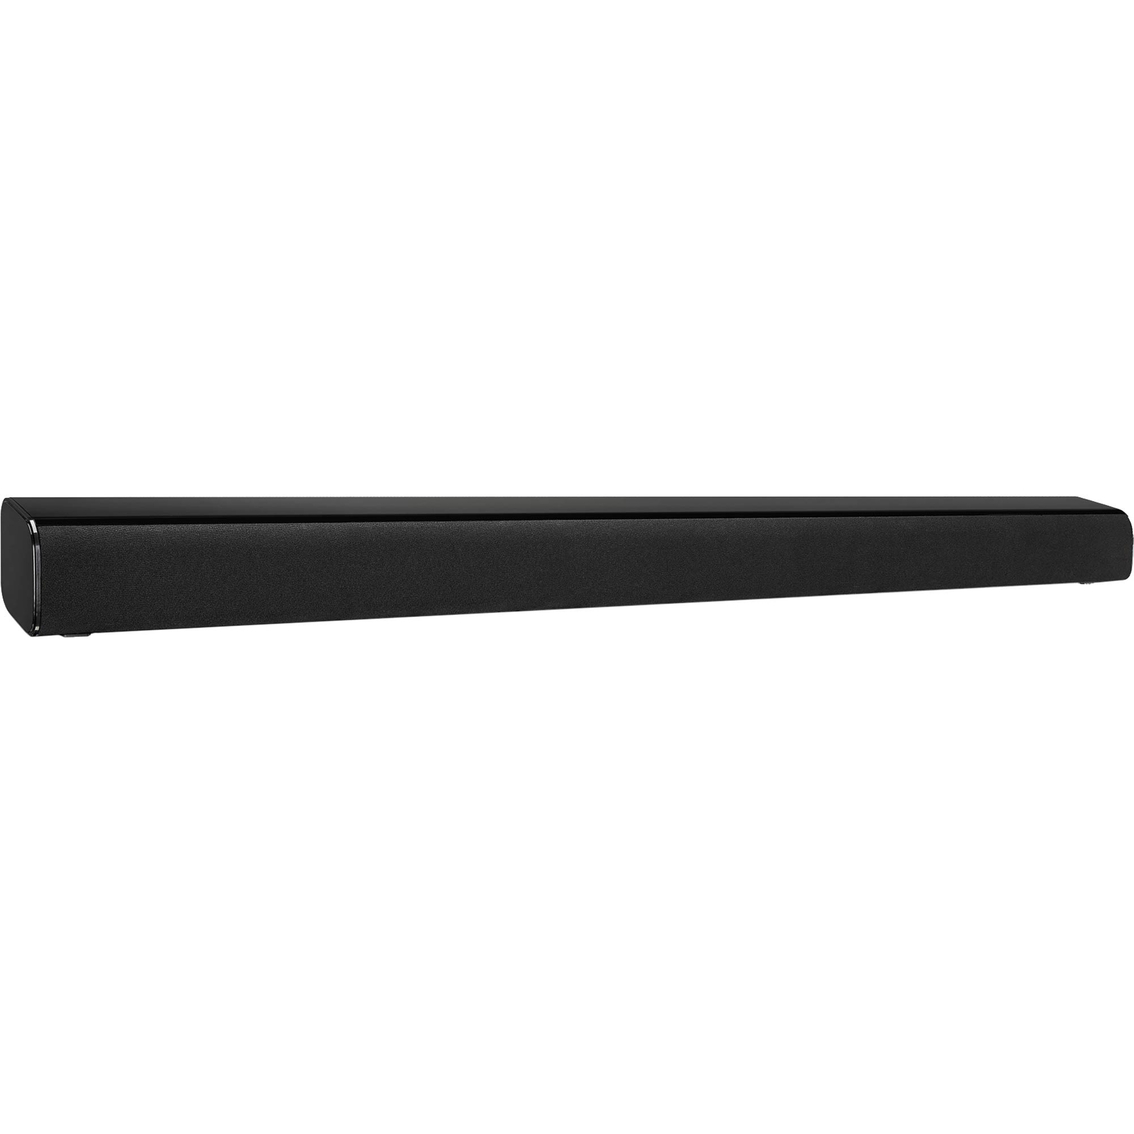 iLive Sound Bar with Bluetooth - Image 2 of 3